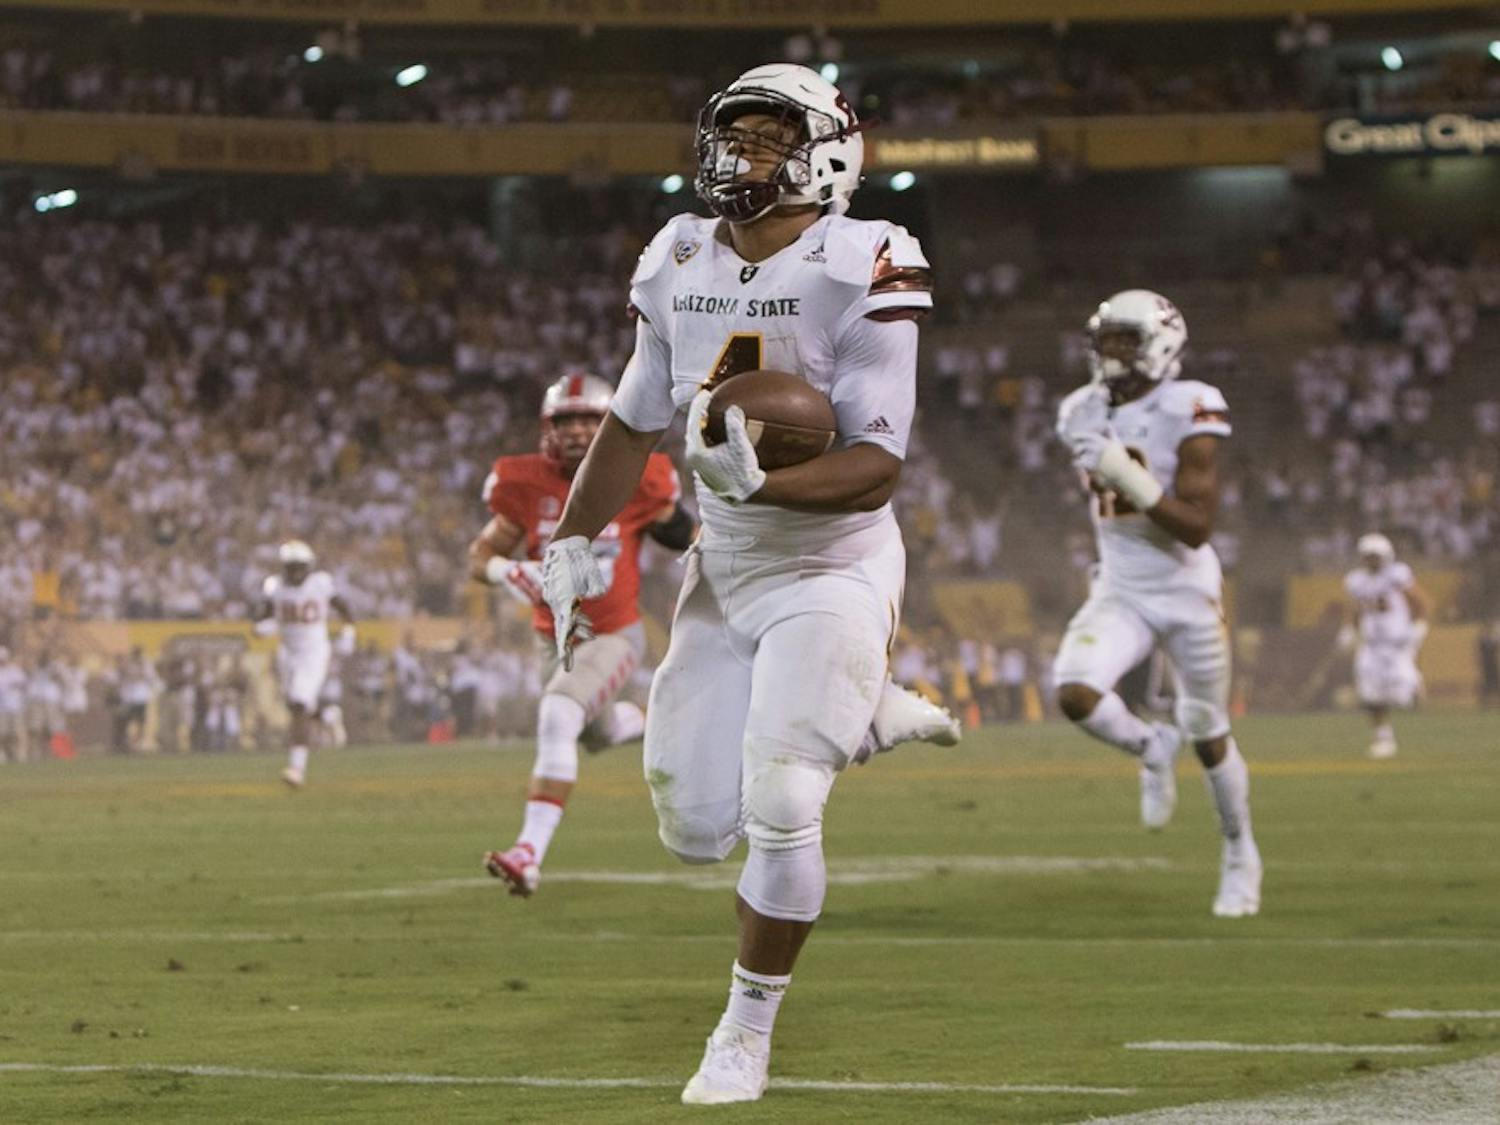 Sophomore running back Demario Richard carries a pass 93 yards for a touchdown against New Mexico on Friday, Sept. 18, 2015, at Sun Devil Stadium in Tempe.